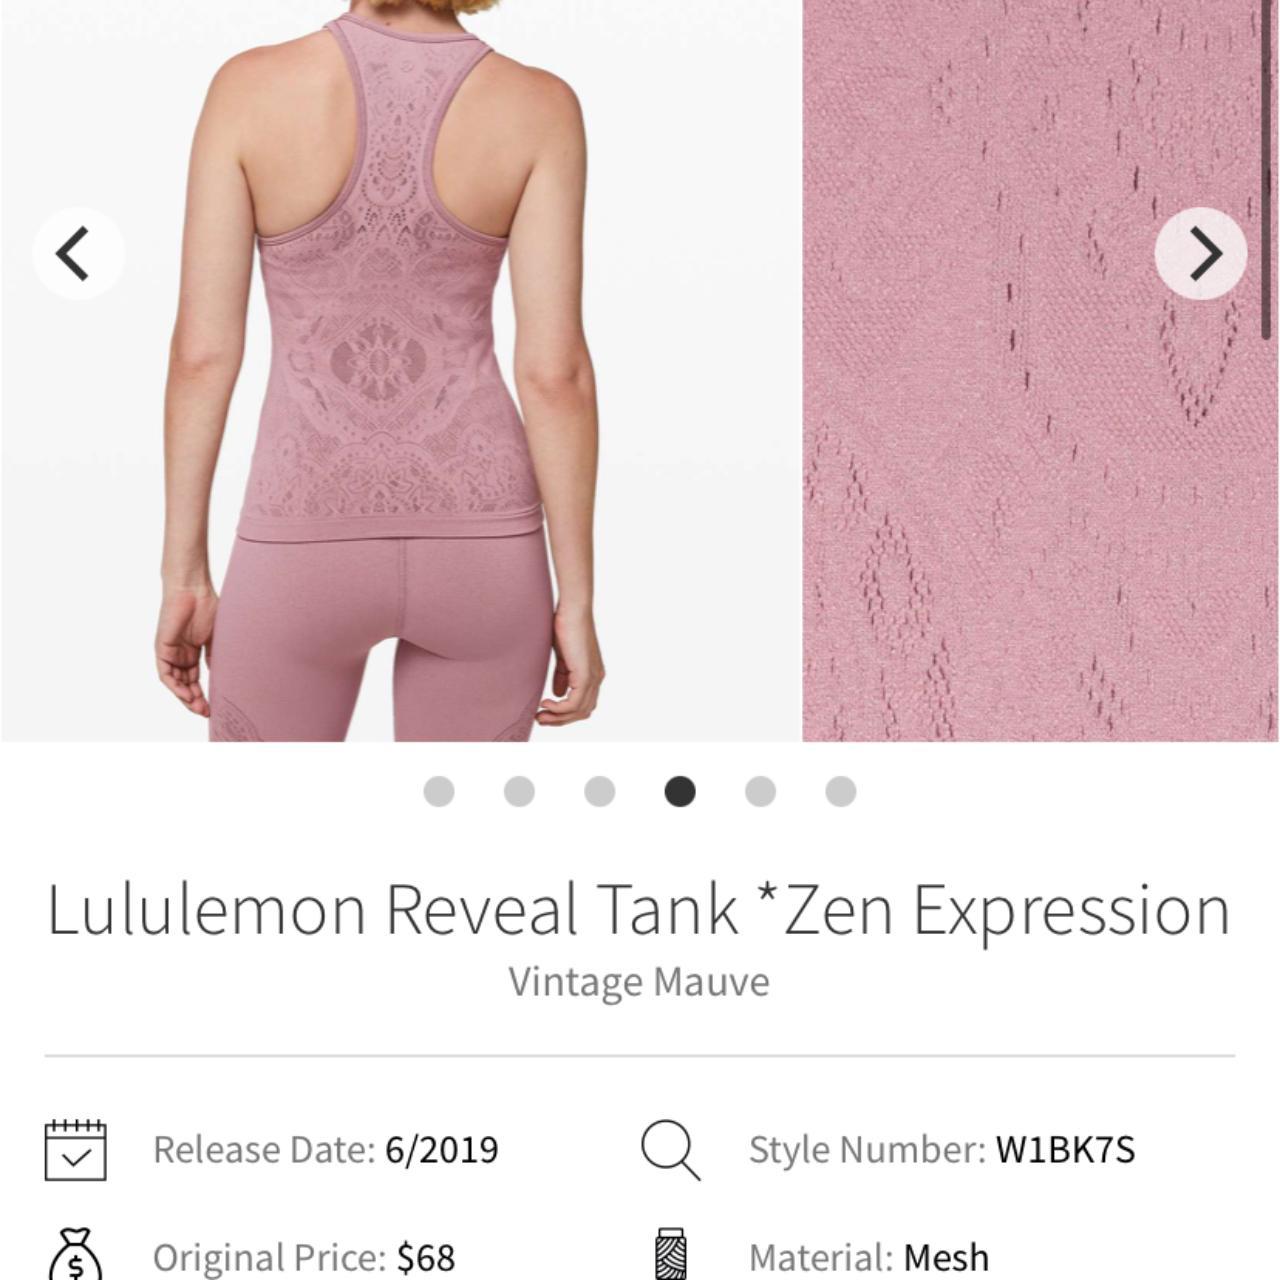 NWT Lululemon Reveal Zen tank. Tight and stretchy. - Depop